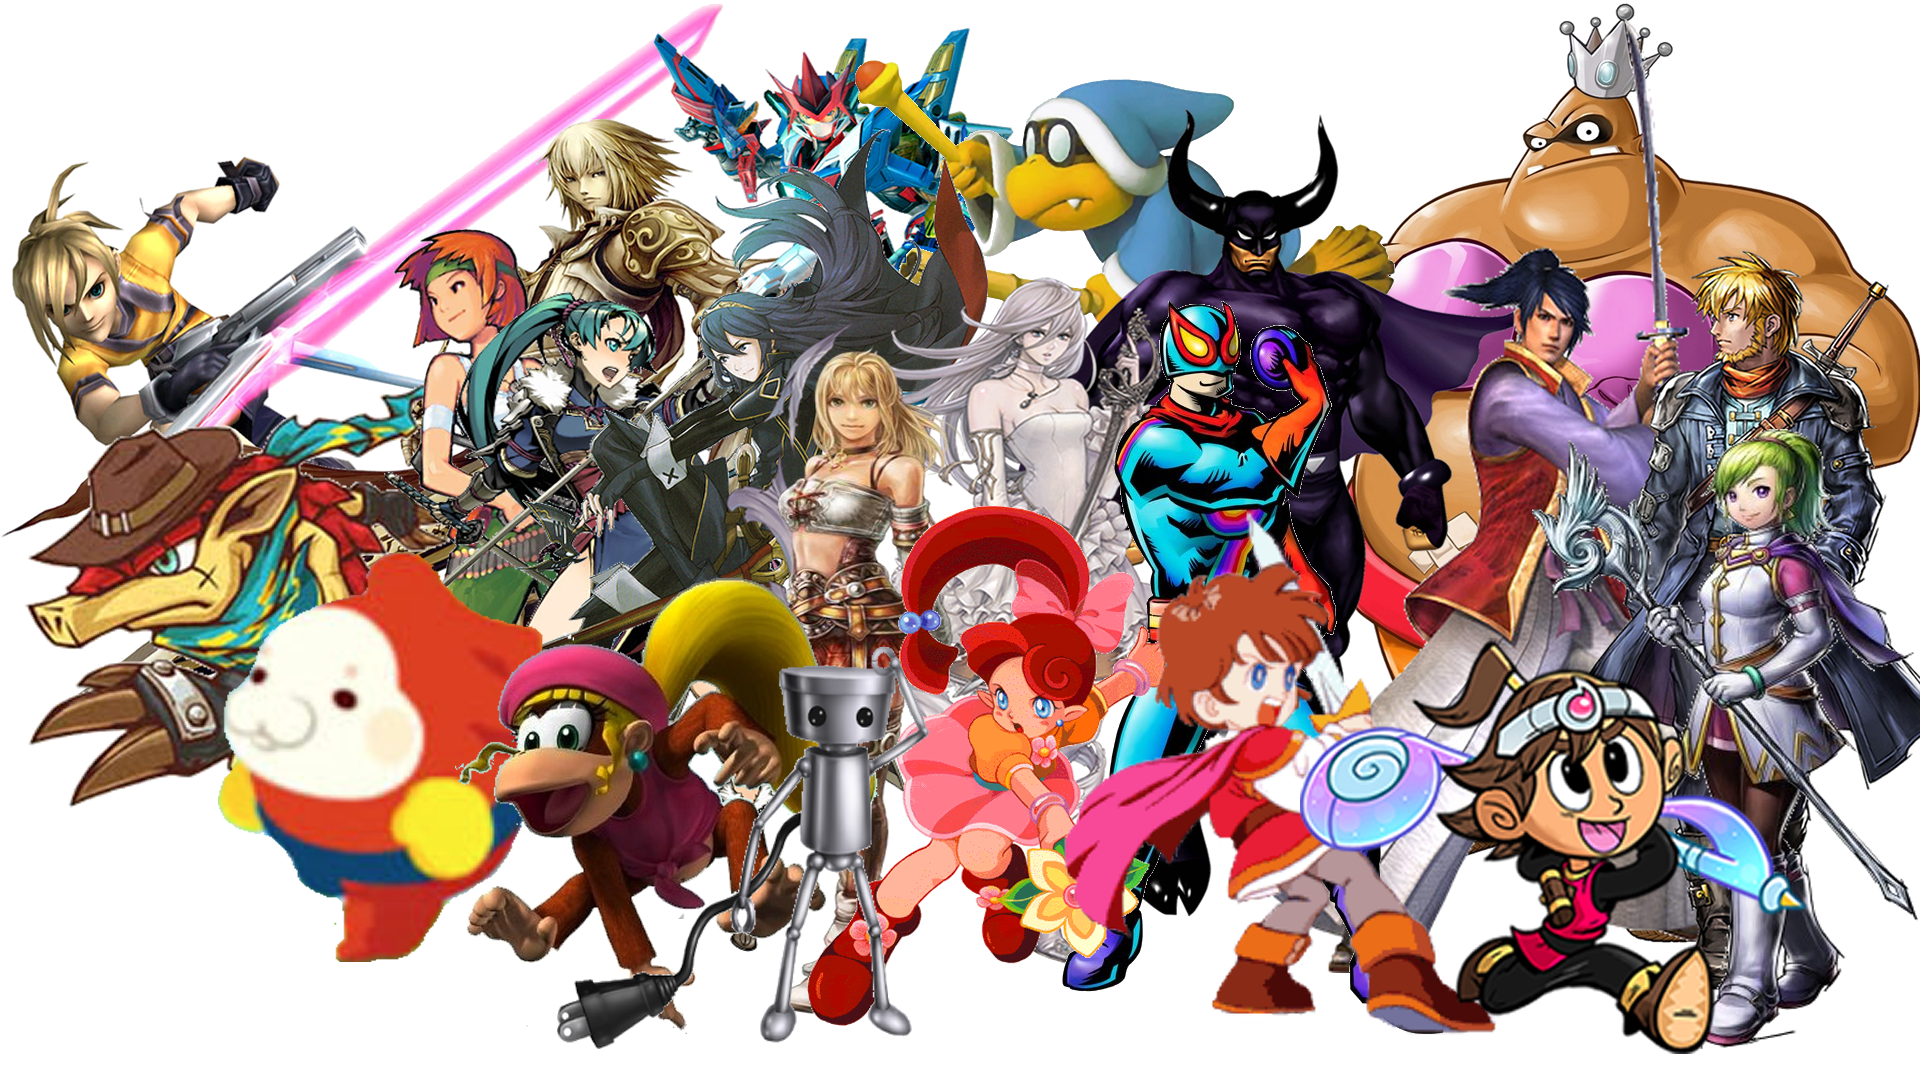 10 Super Smash Bros. For Nintendo 3ds And Wii U HD Wallpapers